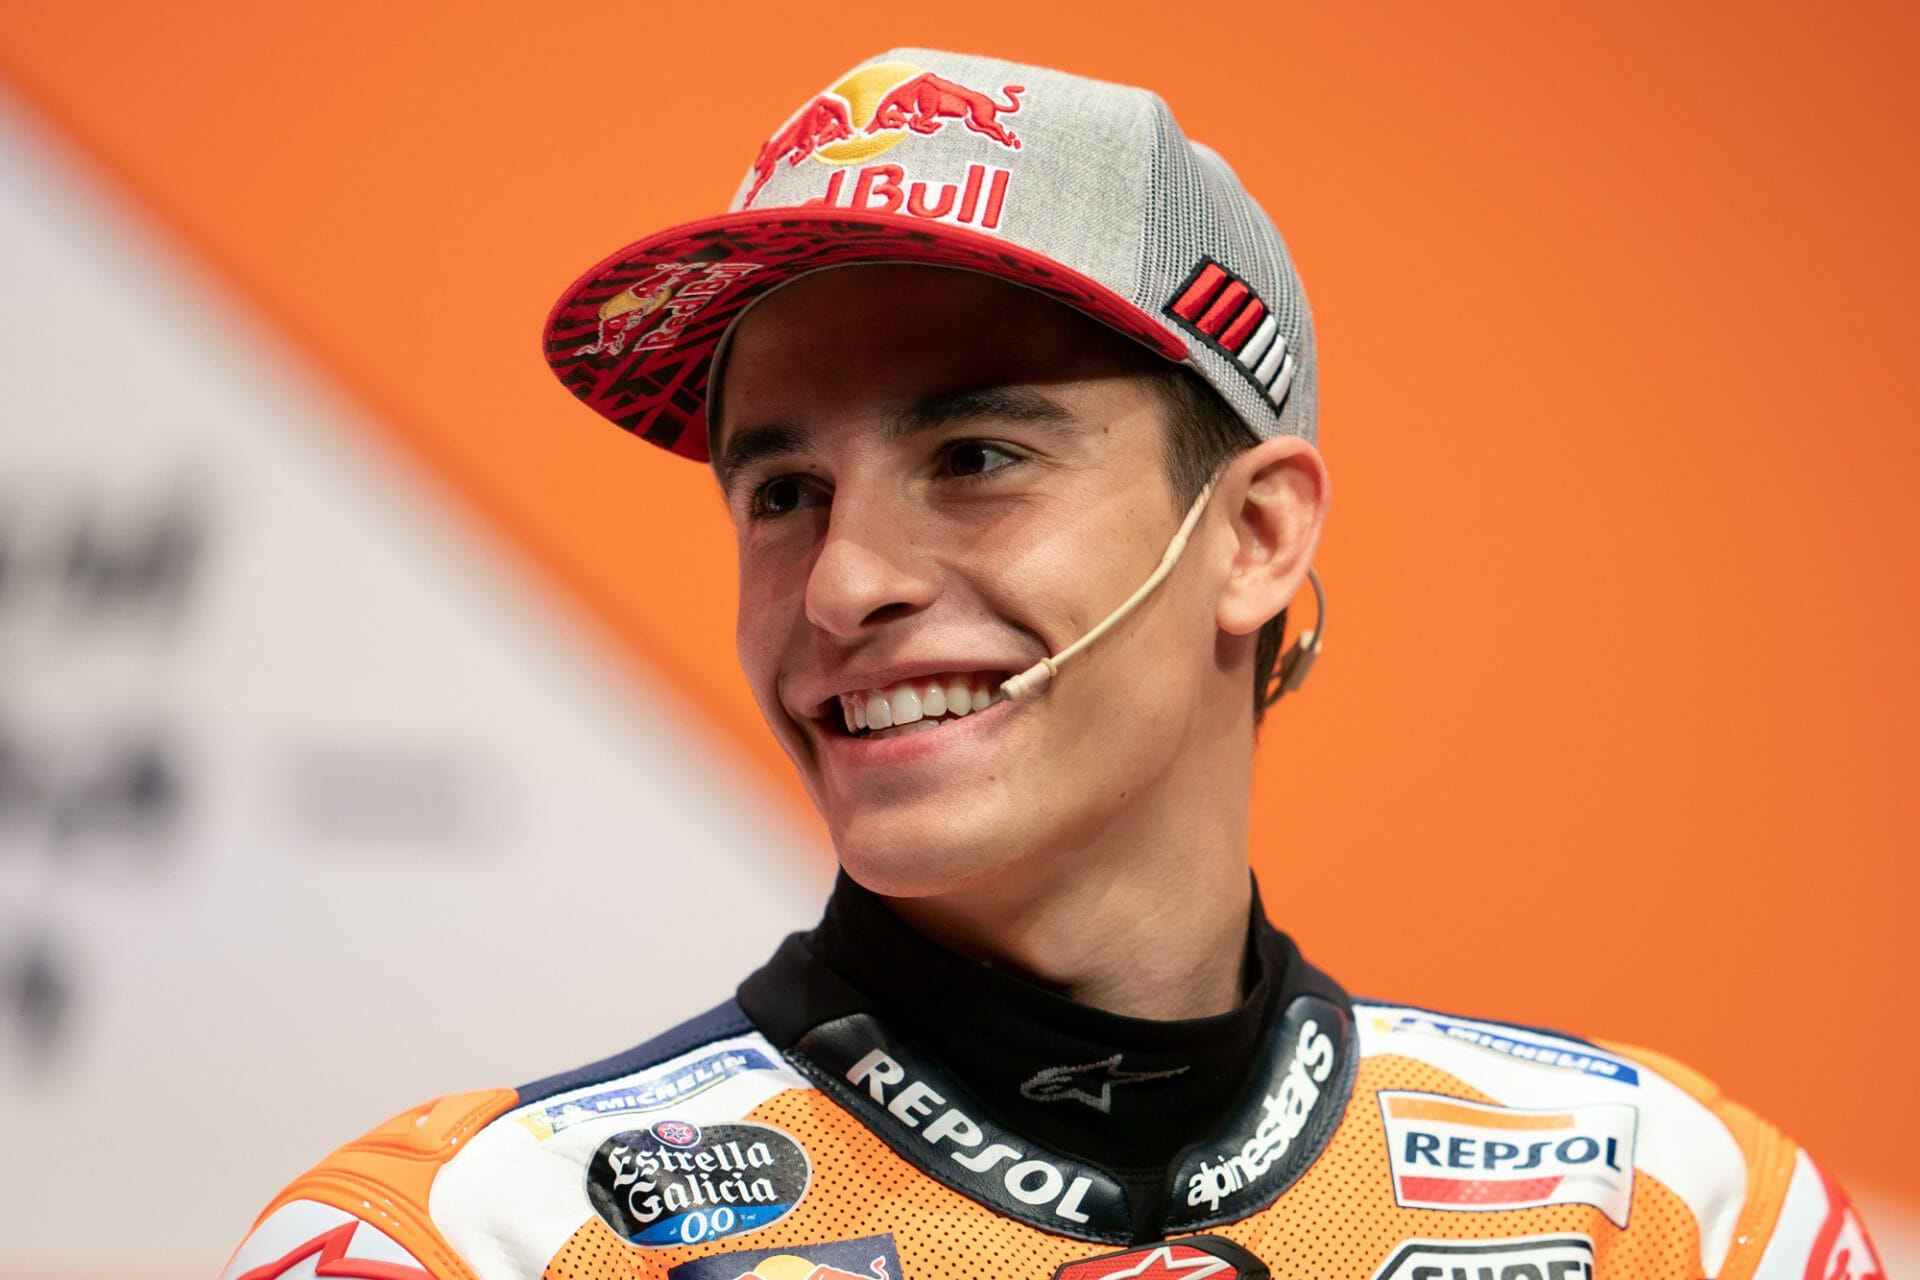 #MarcMarquez - Shoulder surgery after falling at Jerez test needed
- also in the app Motorcycle News